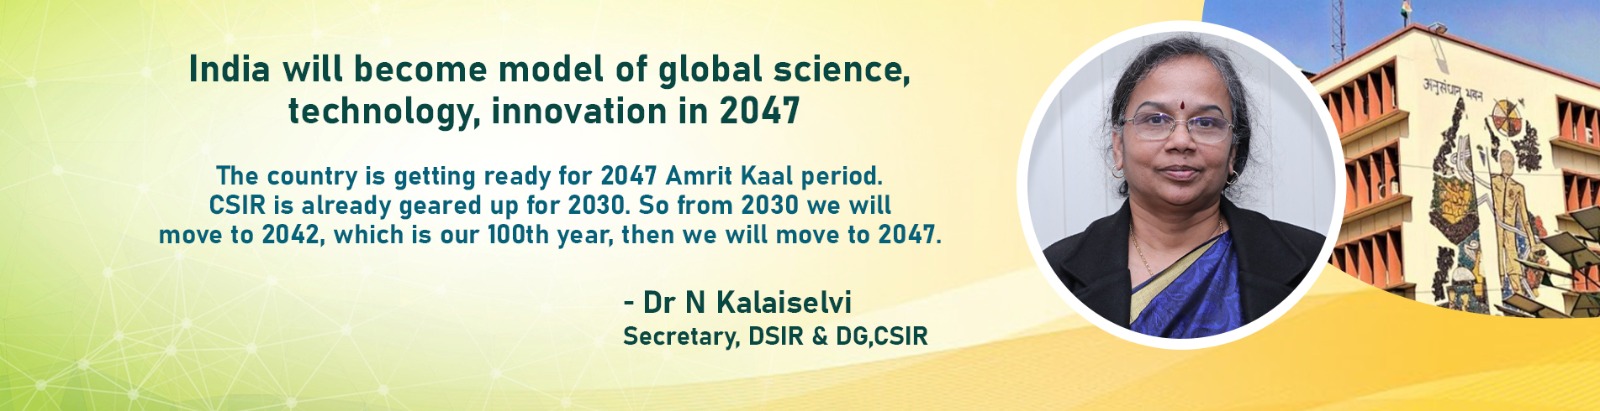 India will Become Model of Global Science, Technology, Innovation in 2047